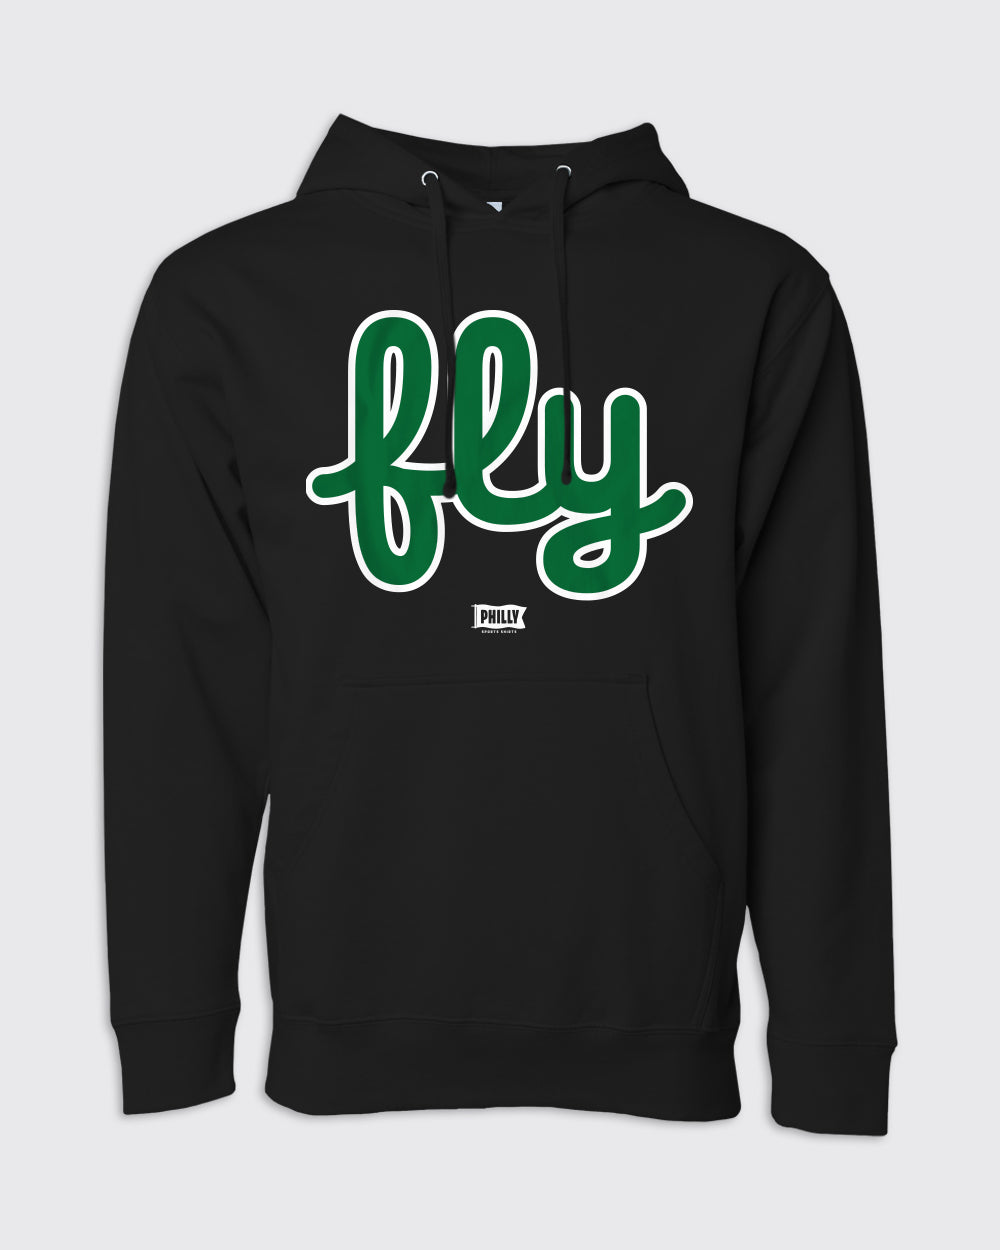 Eagles Fly Hoodie - Eagles, Hoodies - Philly Sports Shirts